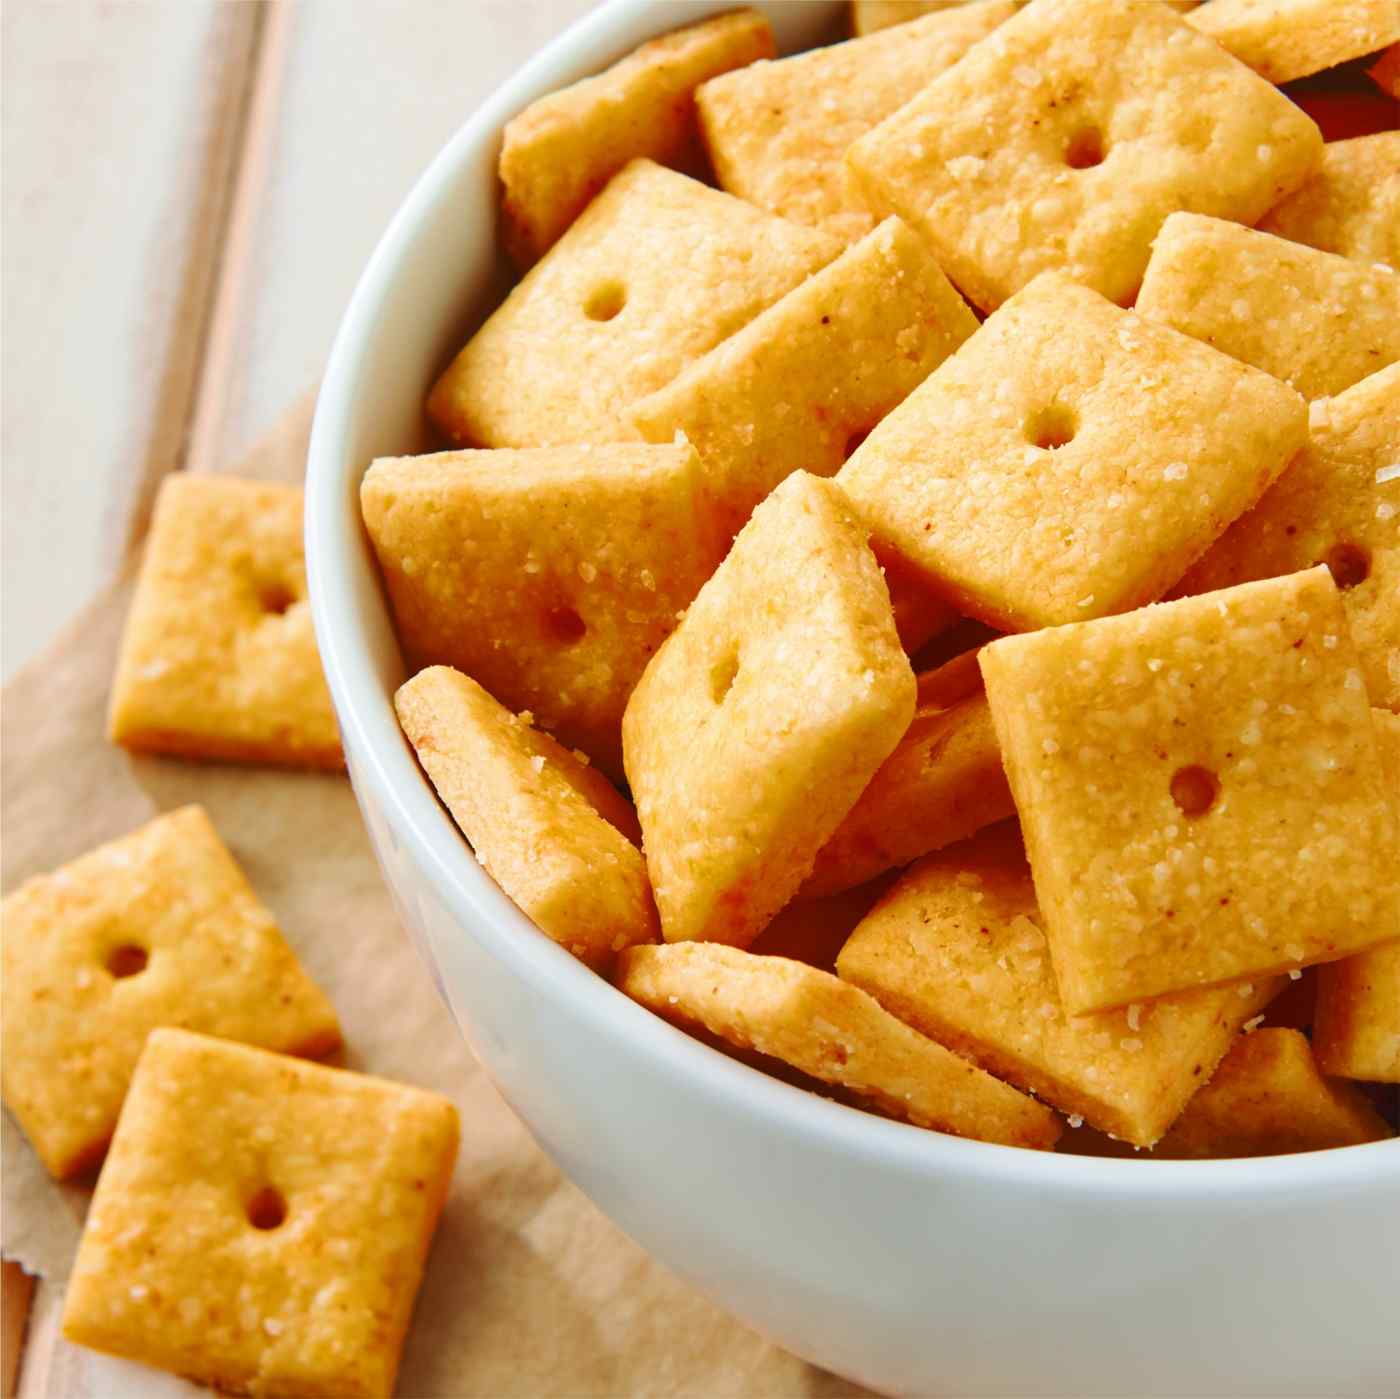 Make cheese crackers yourself with cheddar or other cheese